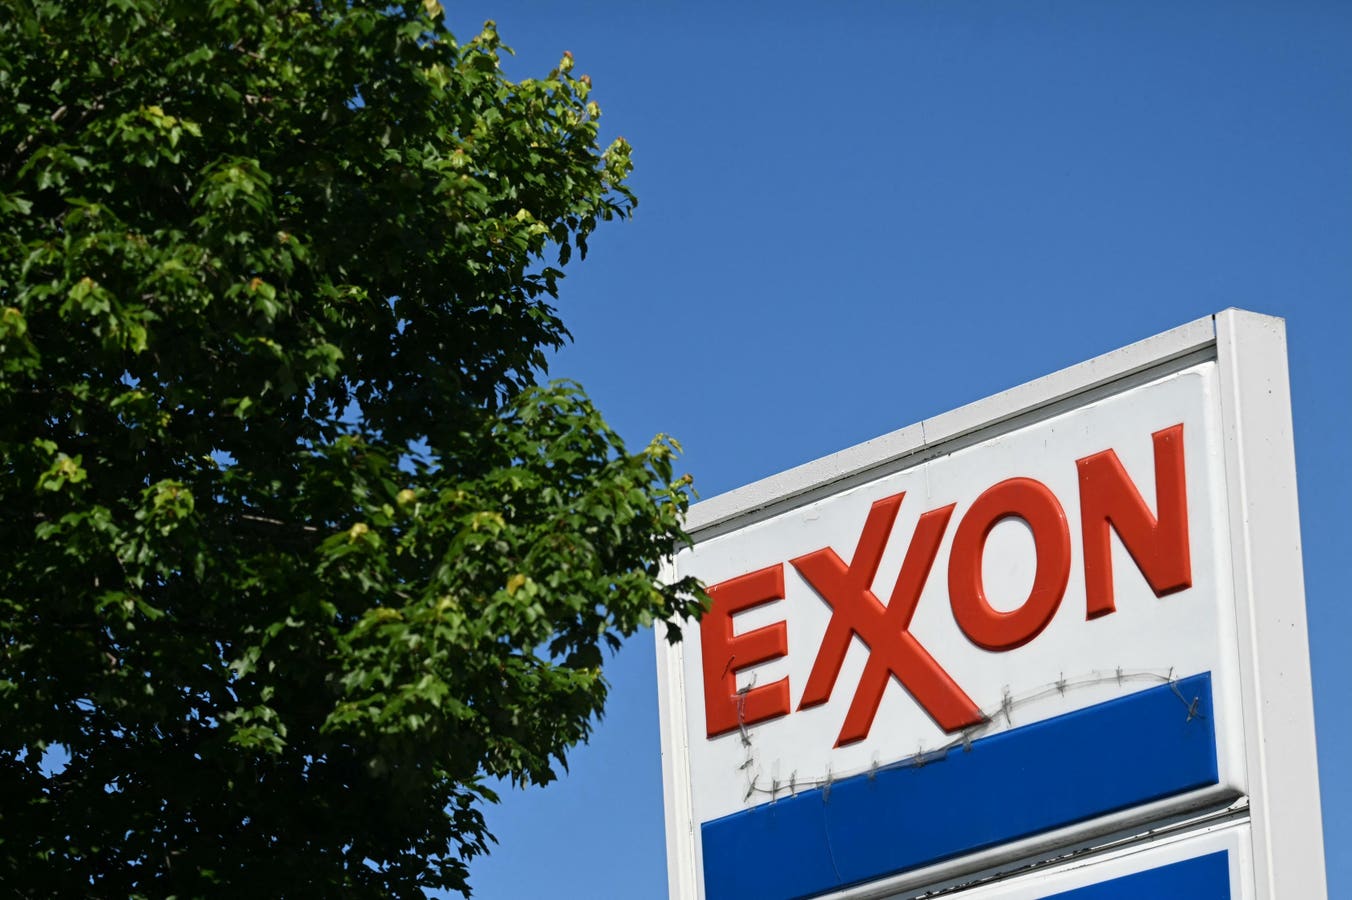 Rising 18% This Year, Will Exxon Mobil’s Run Continue Following Q2 Results?